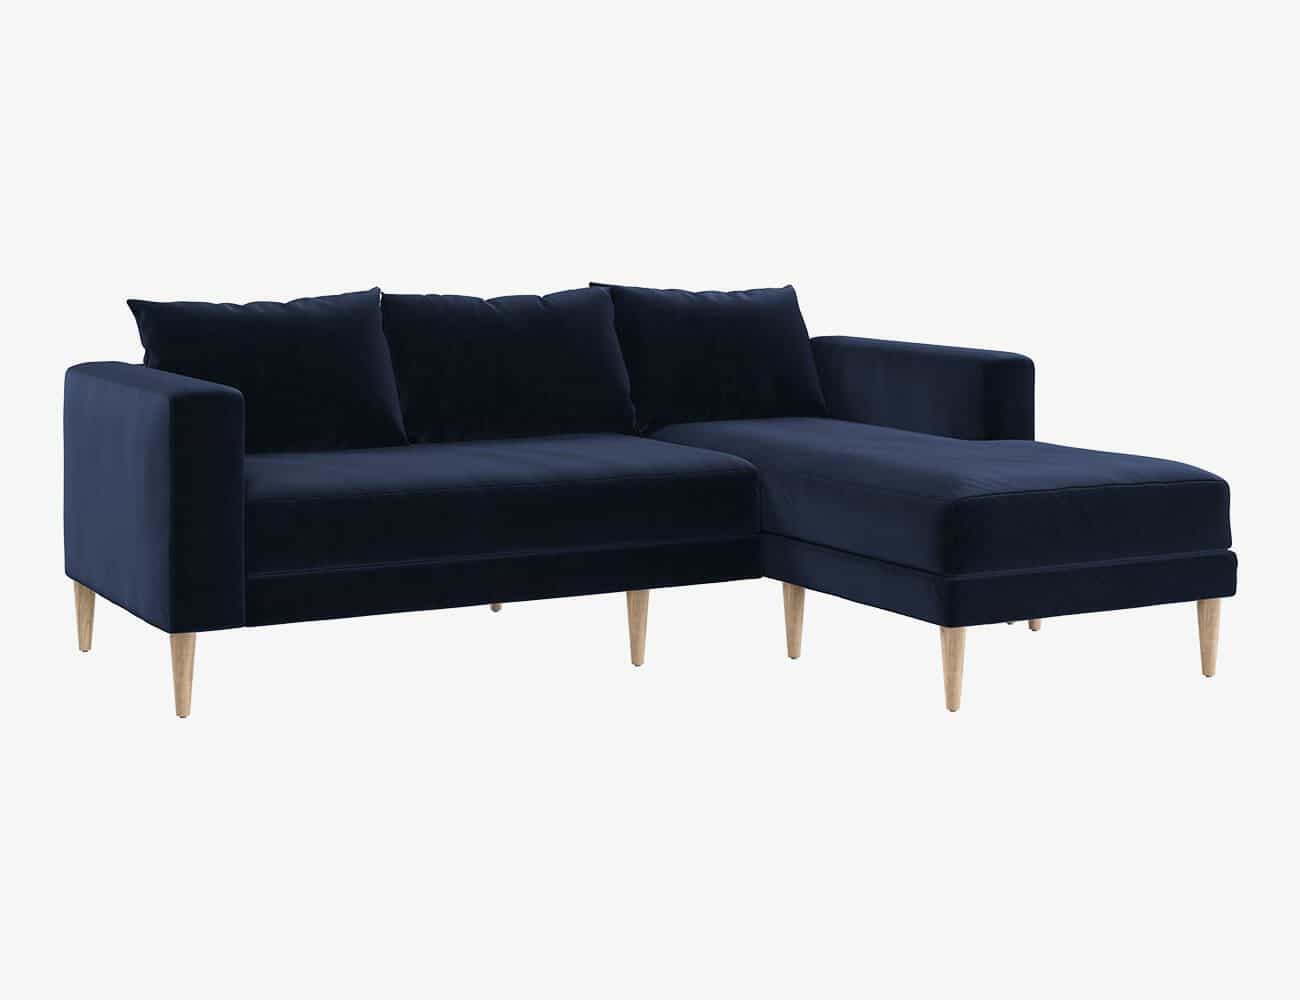 Simply put, the Allform couch from Helix is a classic, comfortable piece.